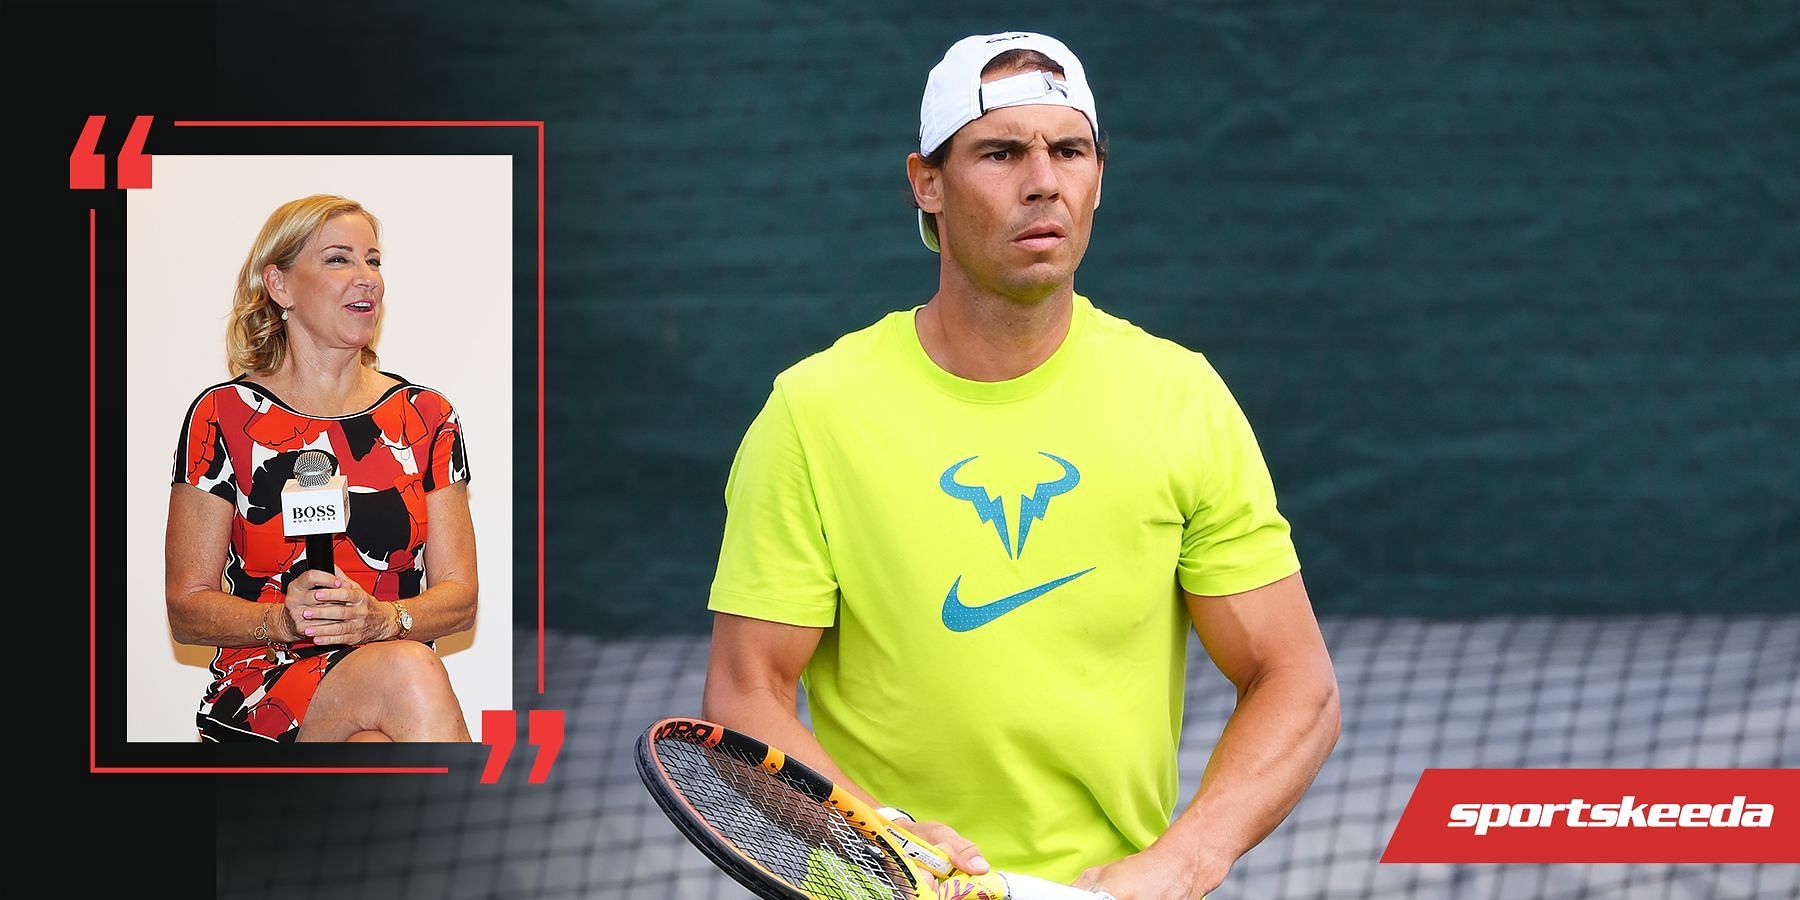 Rafael Nadal is eyeing the Calendar Slam for the first time in his career